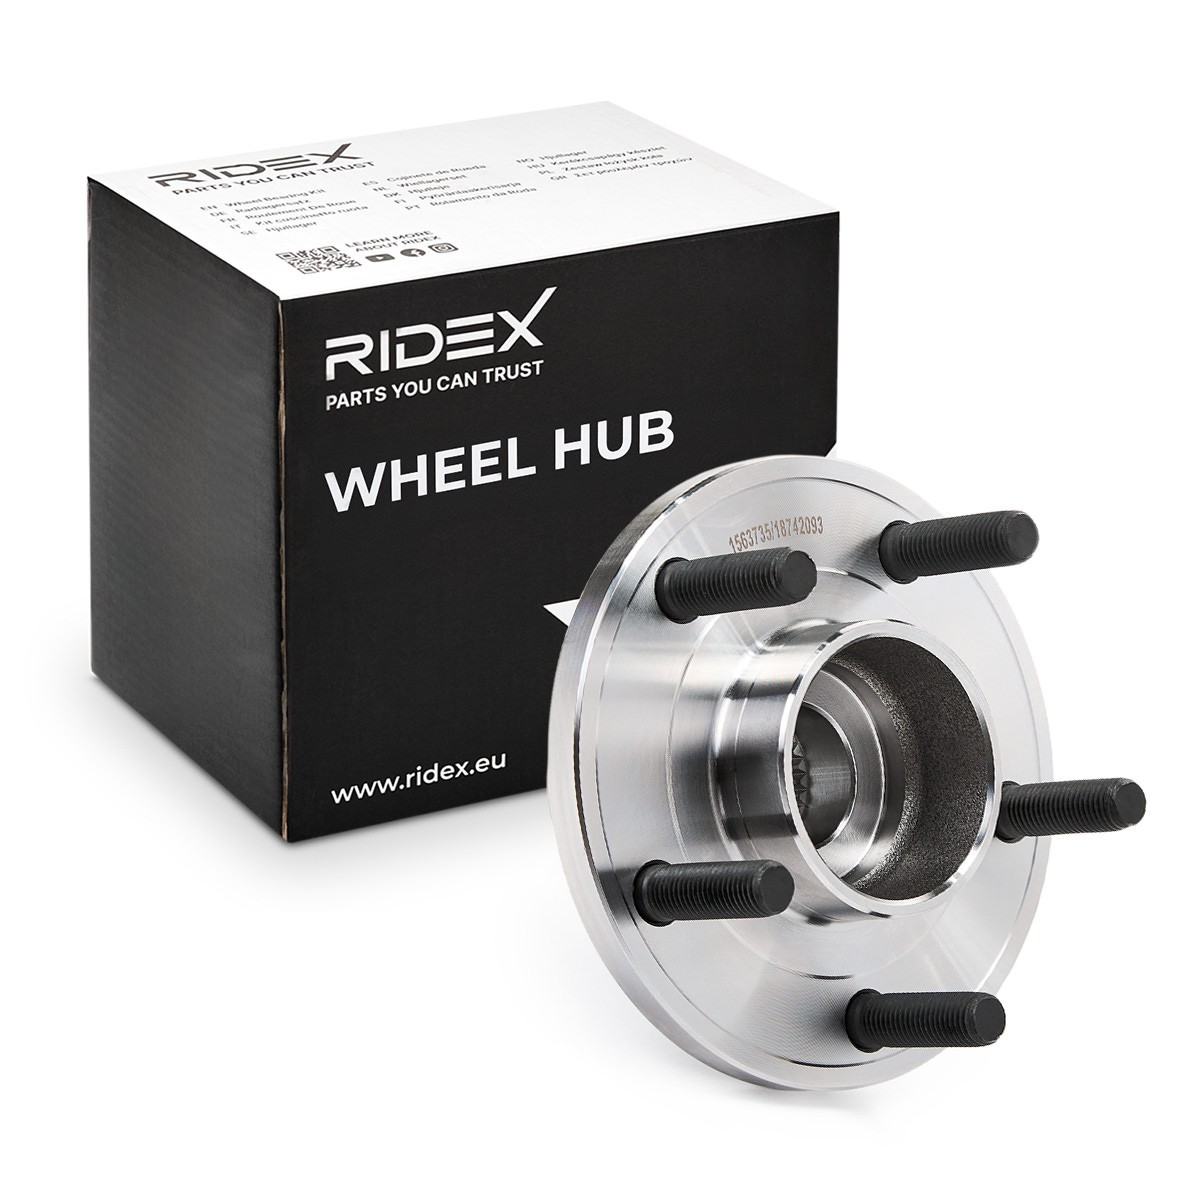 RIDEX 653W0256 Wheel Hub 108, with wheel studs, Front axle both sides